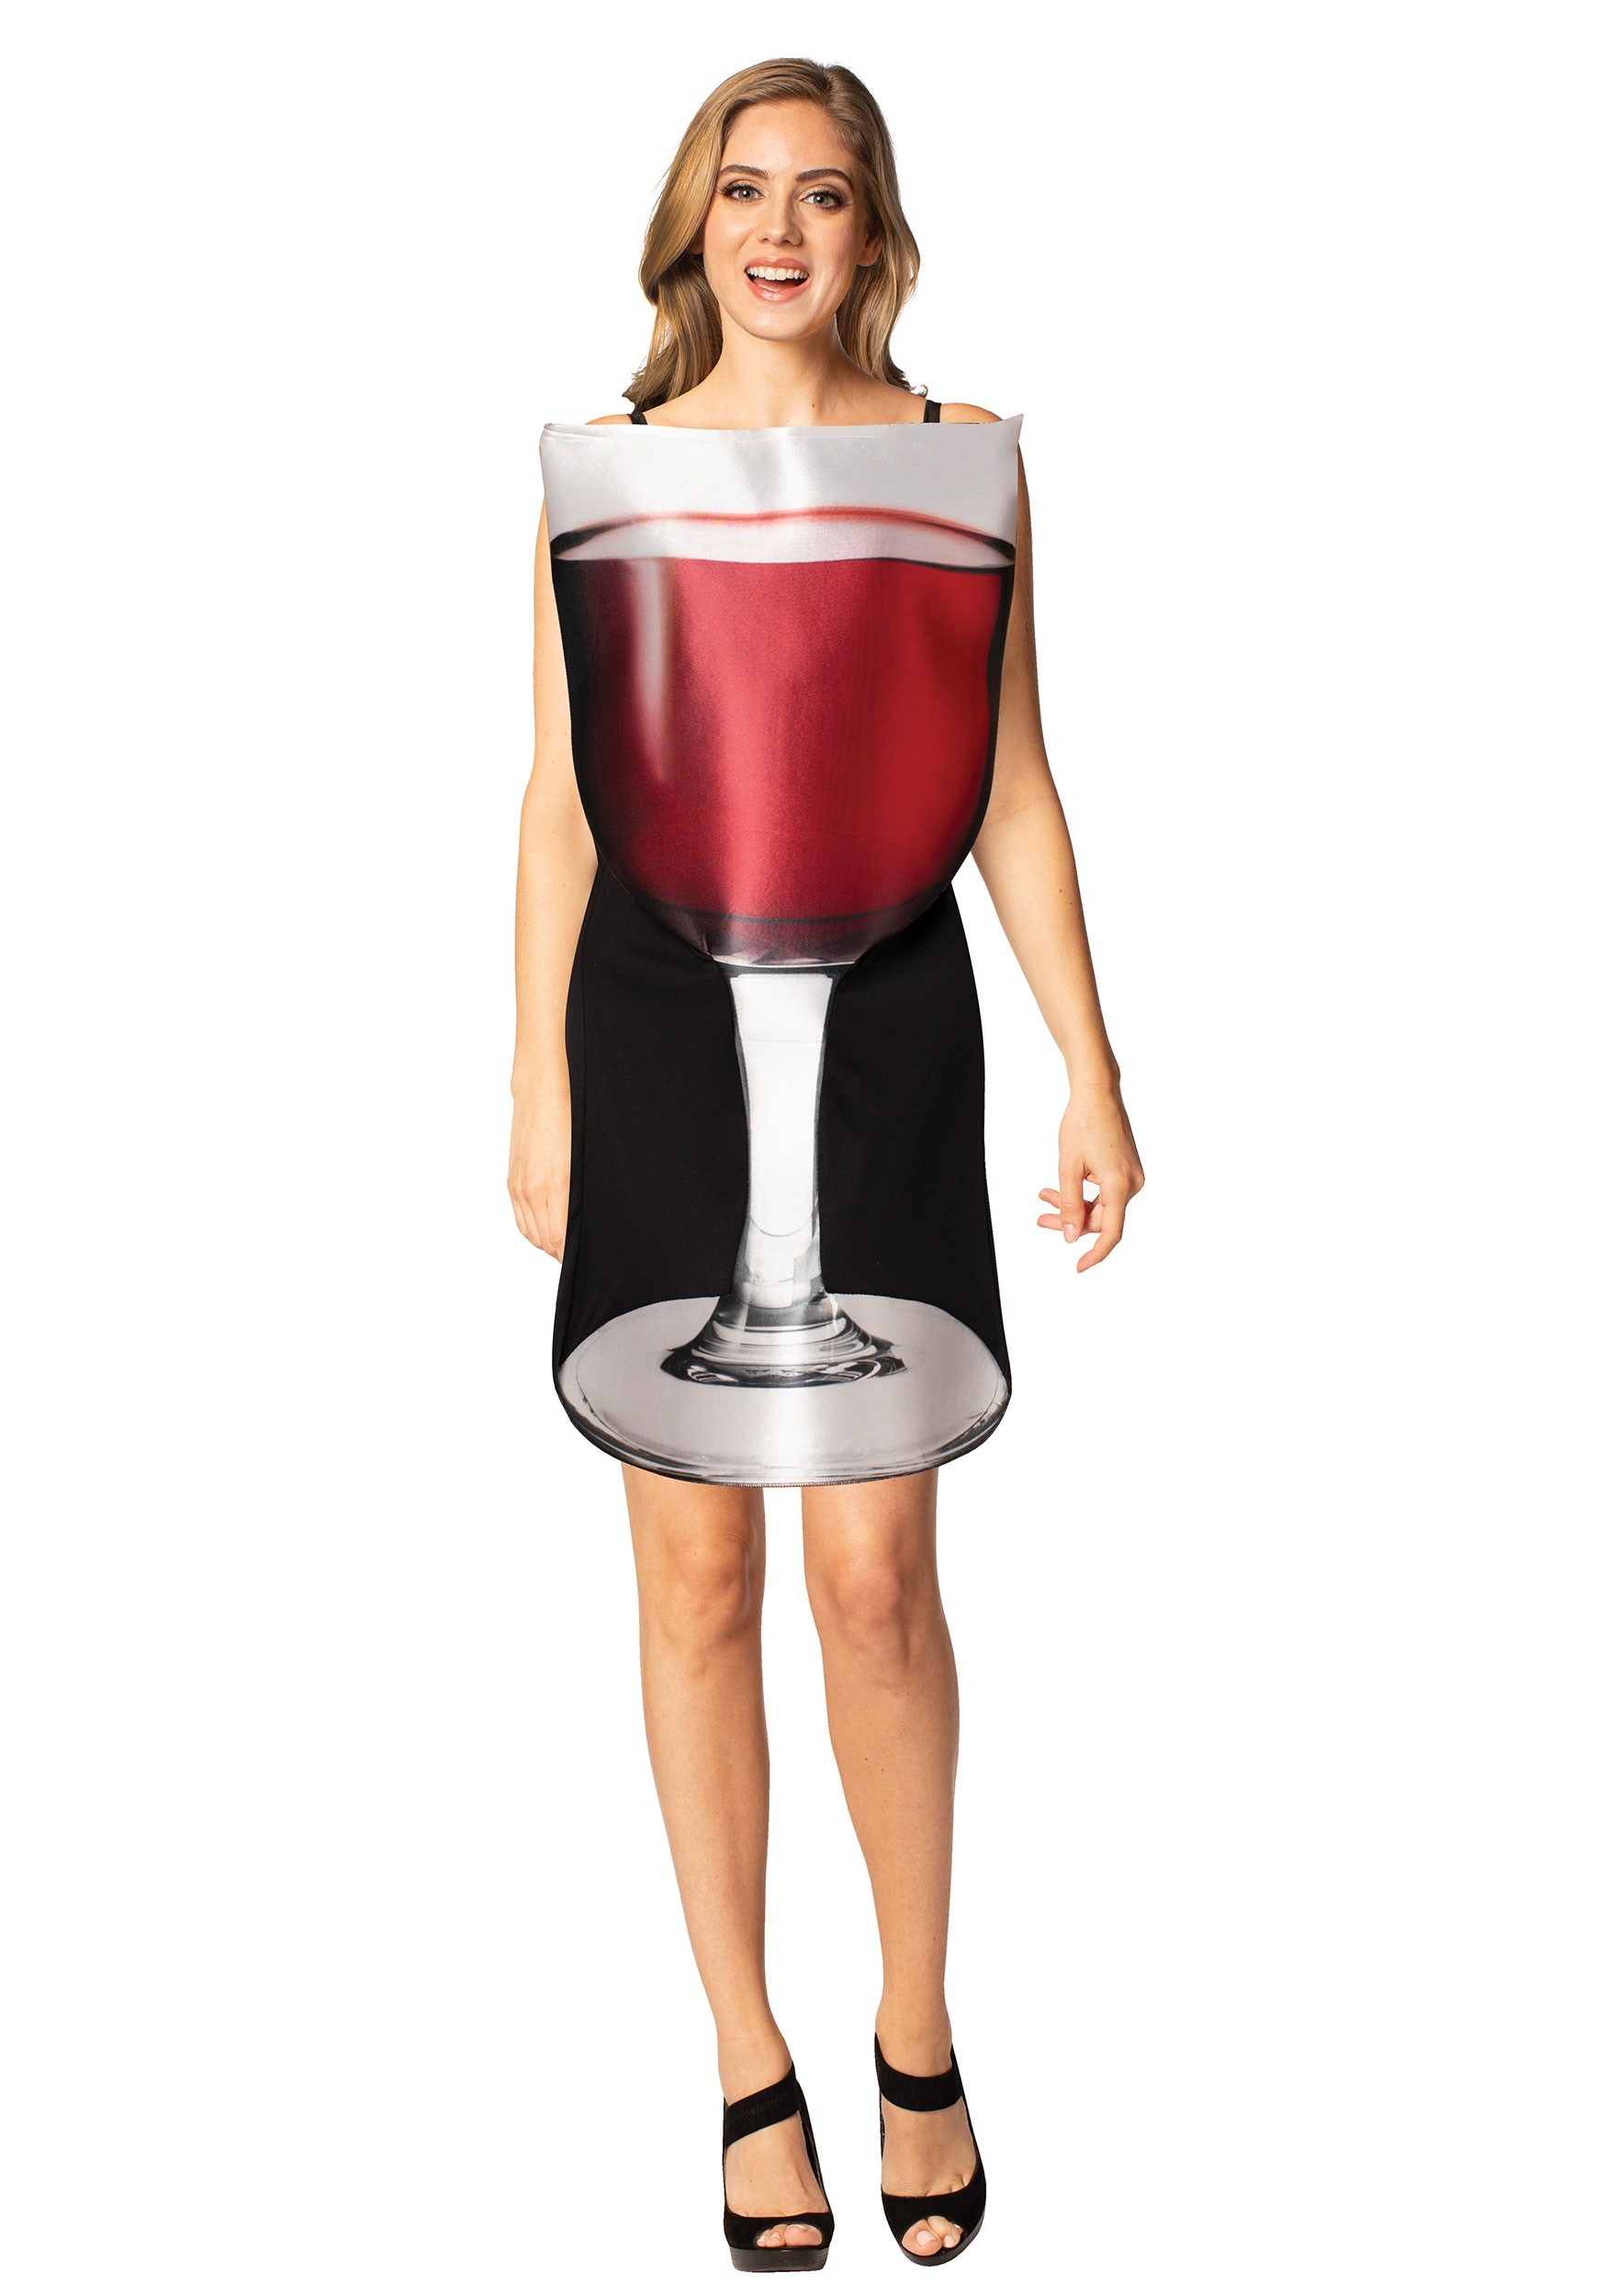 https://images.halloweencostumes.com/products/65527/1-1/womens-glass-of-red-wine-costume.jpg